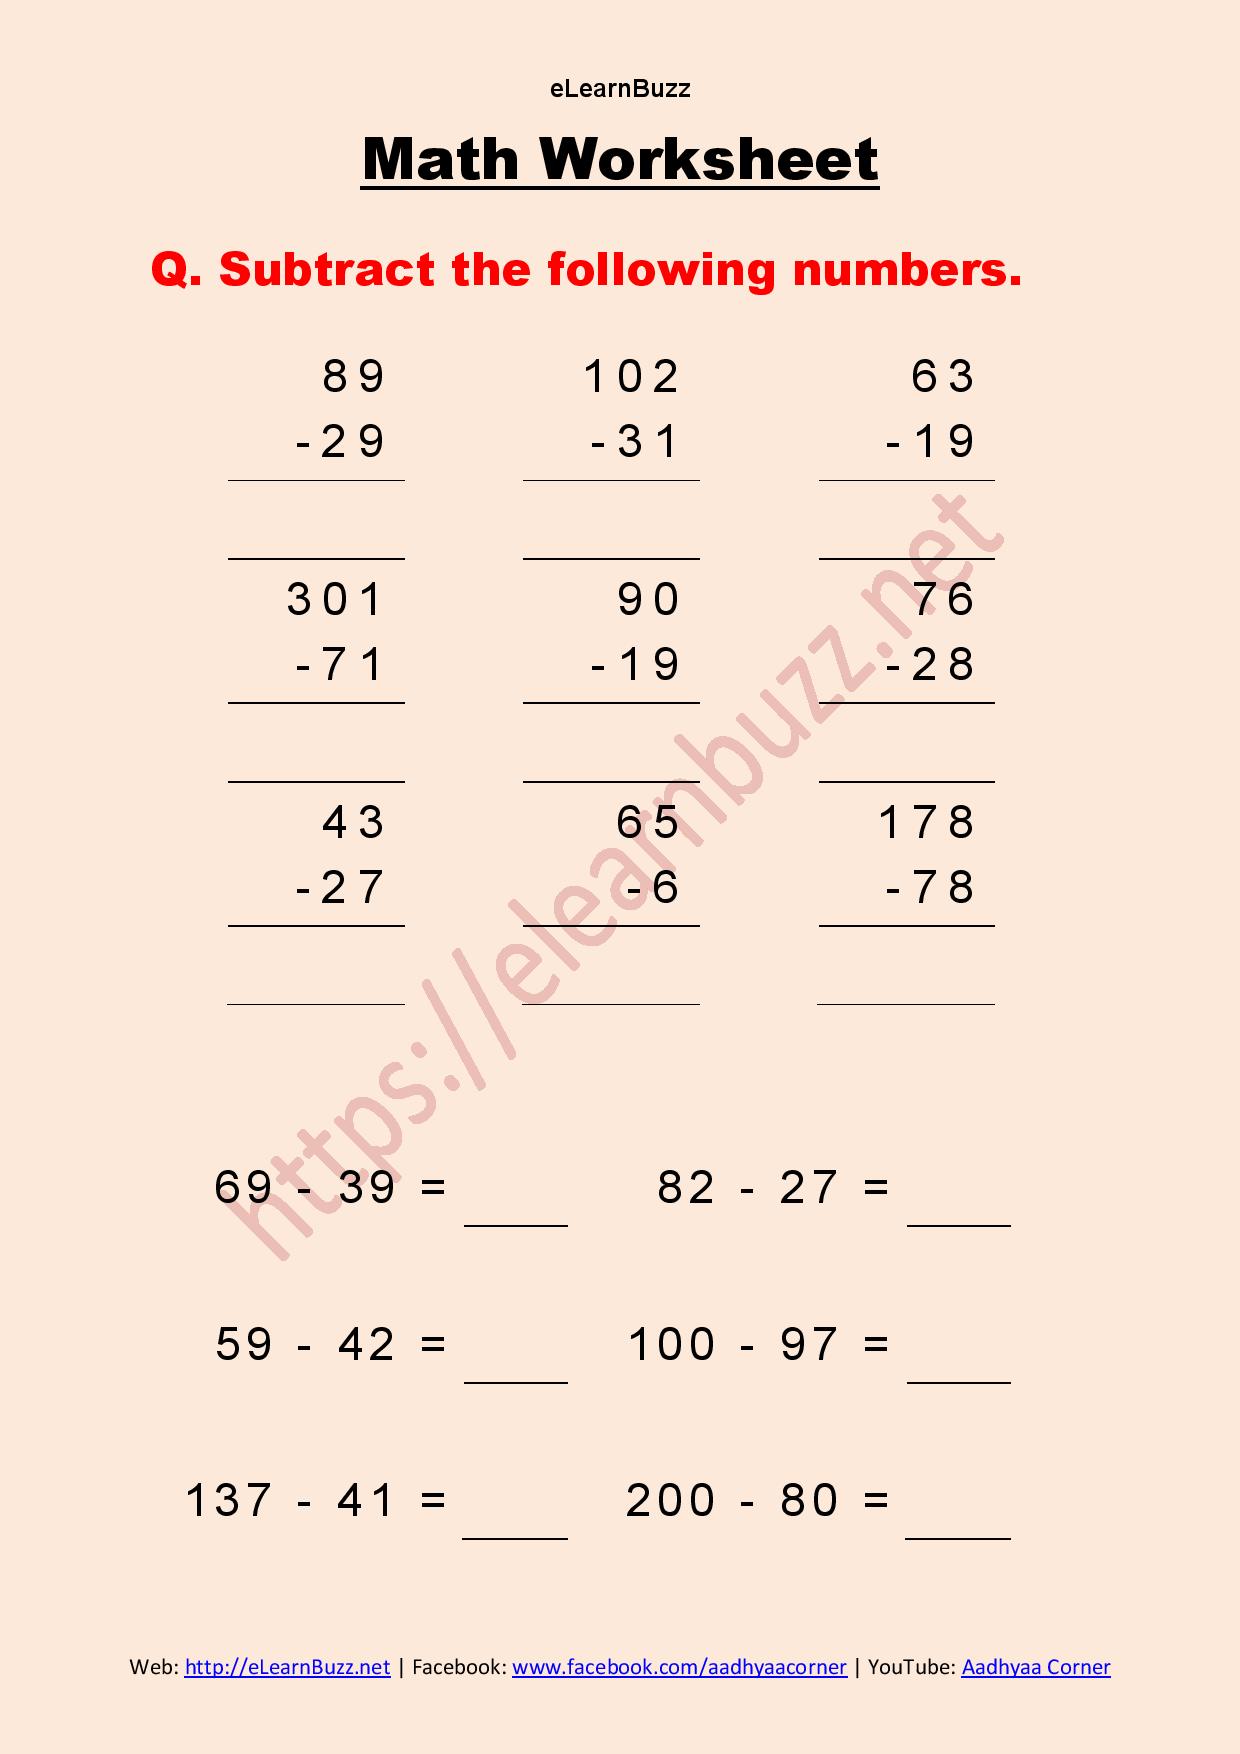 maths-homework-for-class-2-for-april-11-worksheet-on-greater-than-lower-than-and-equal-to